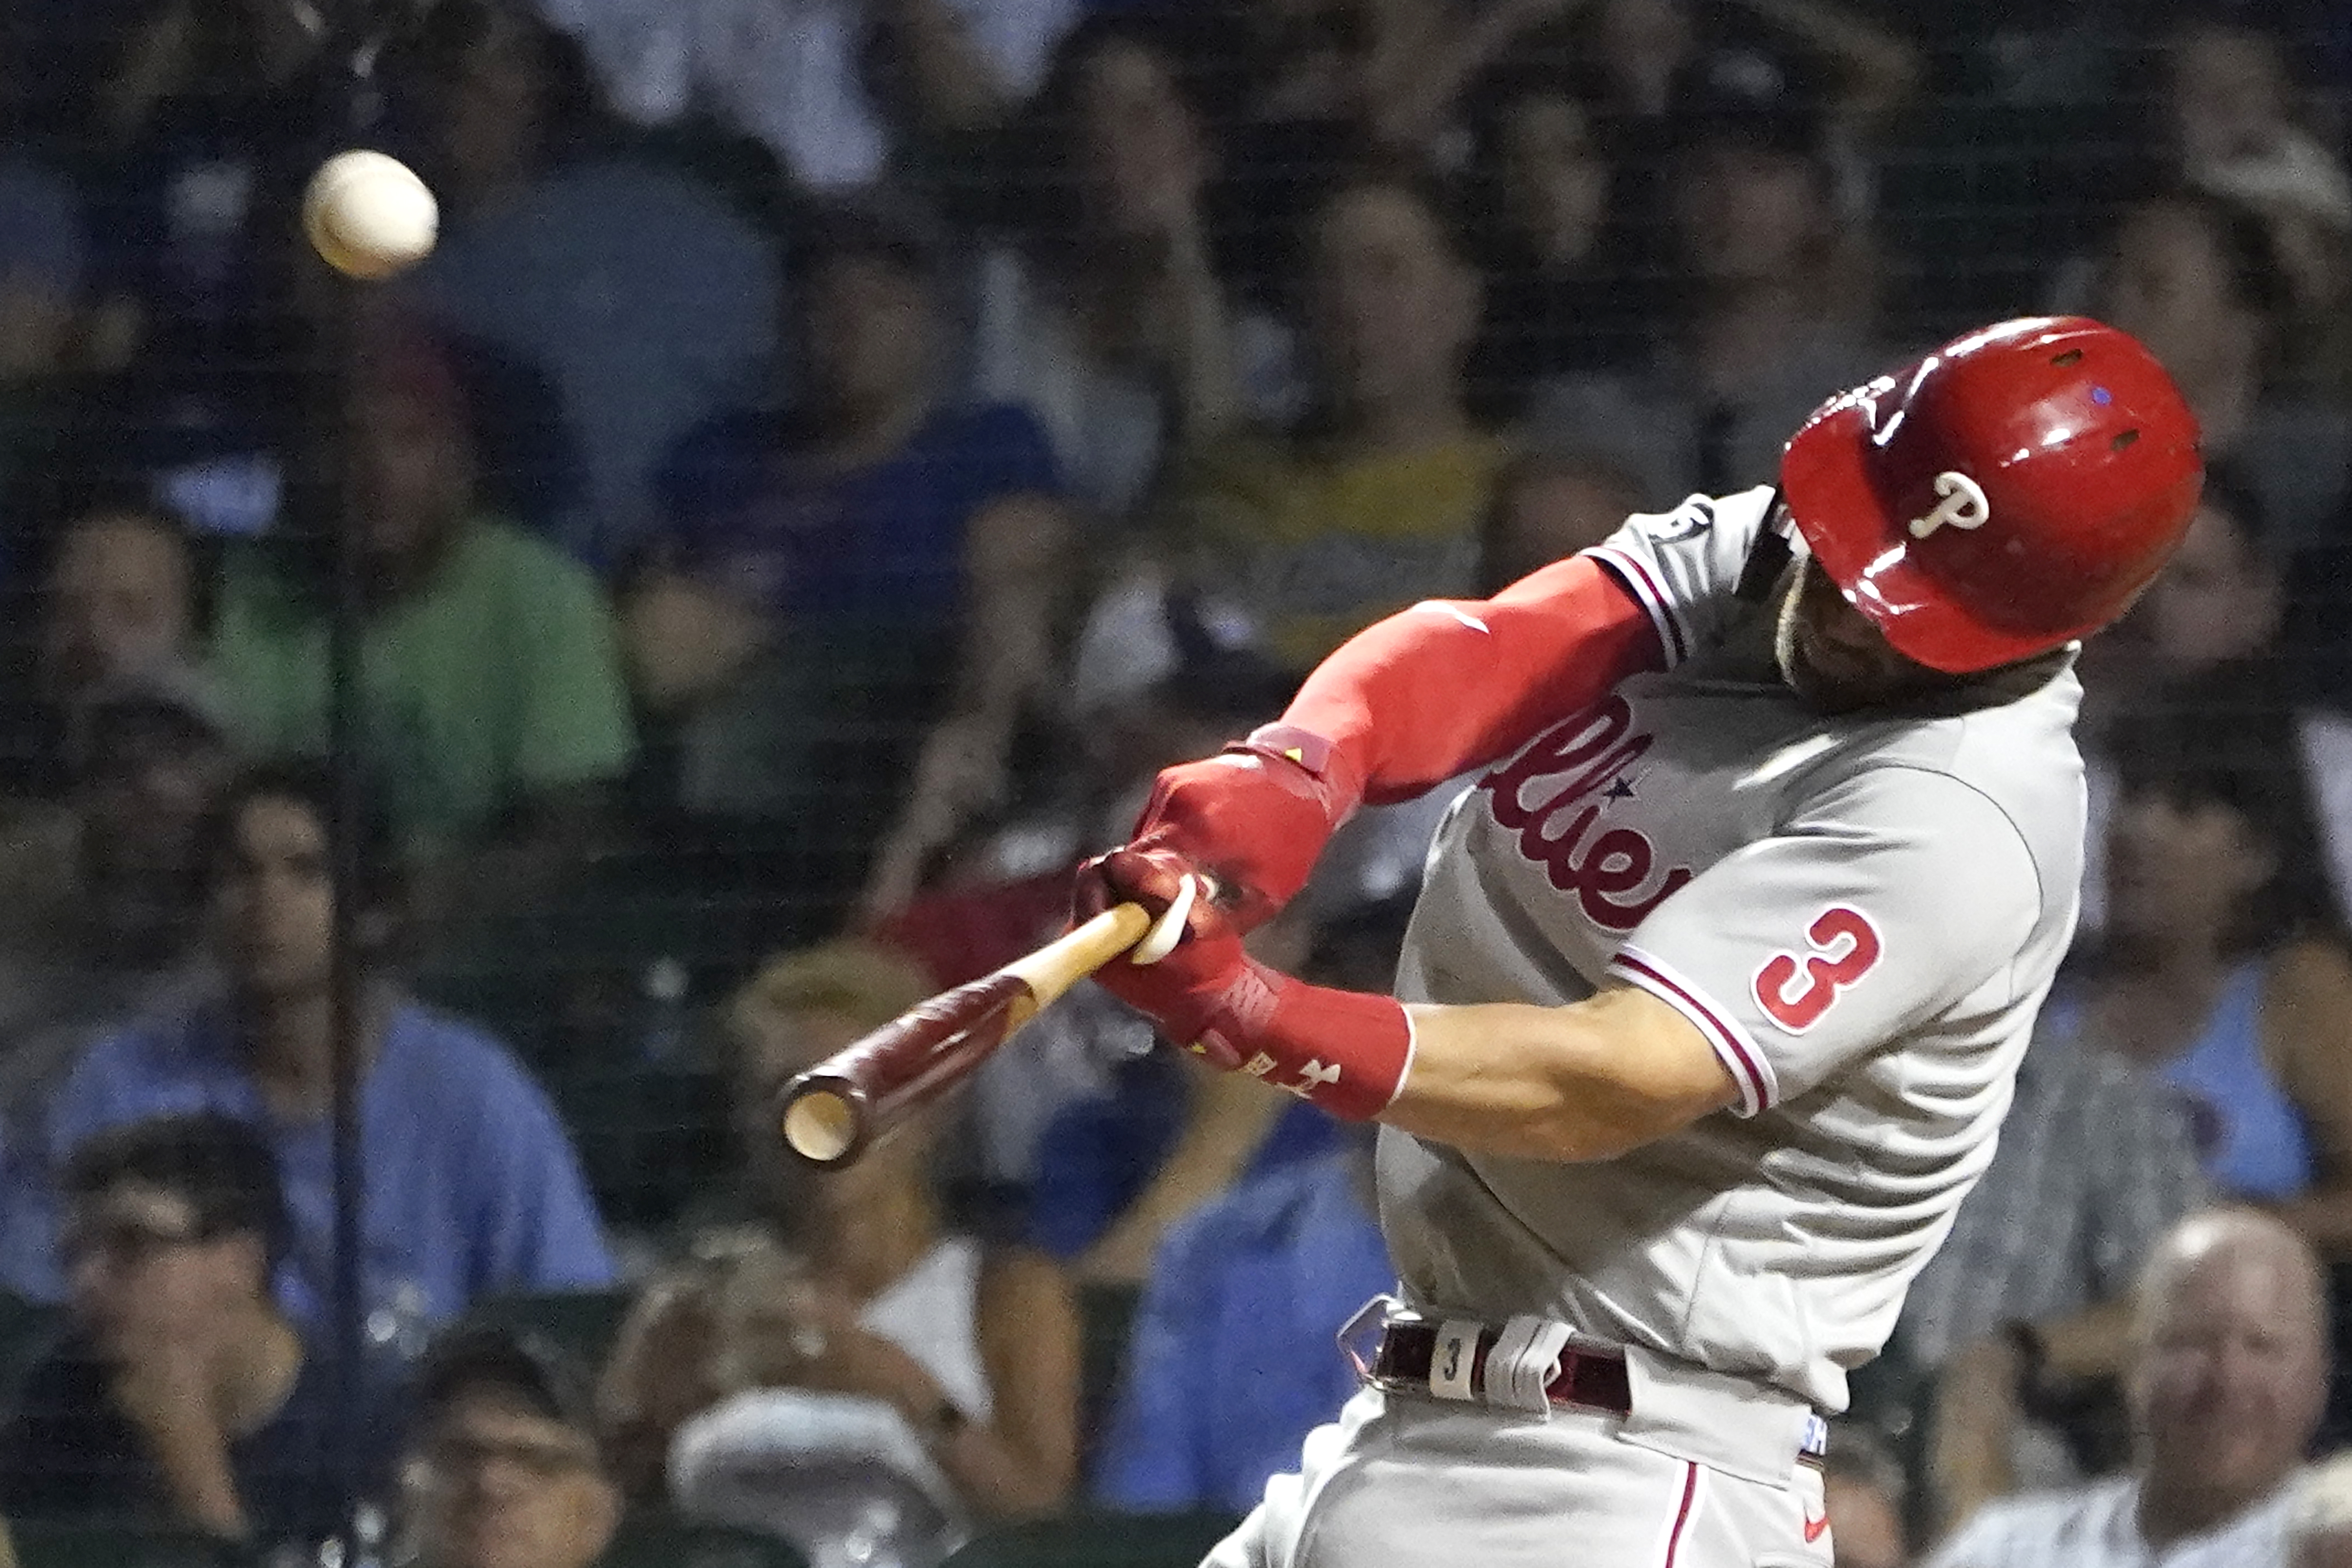 Phillies' Bryson Stott Hilariously Explained How He 'Blacked Out' After  Grand Slam